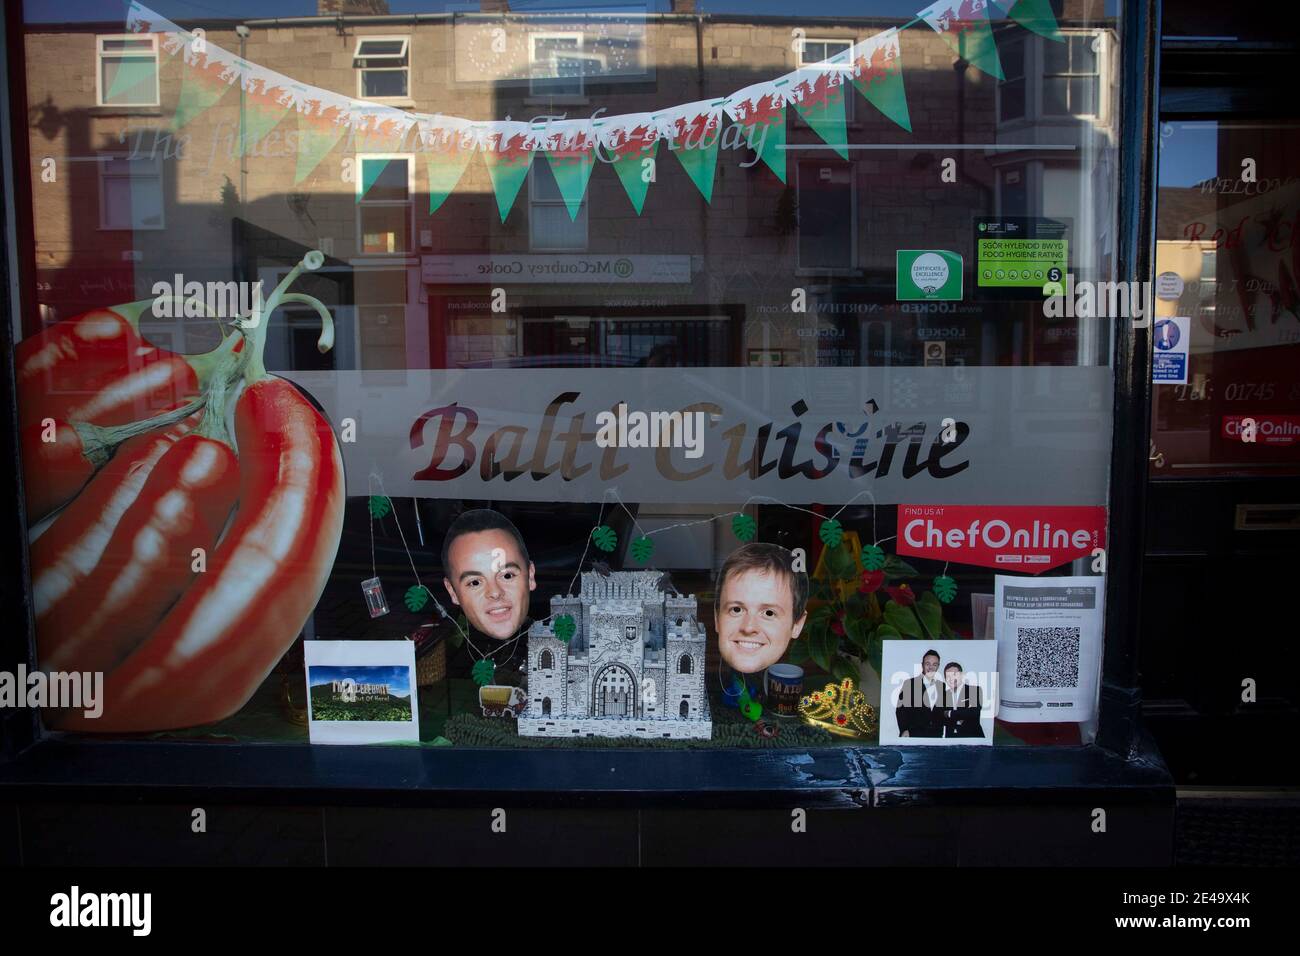 A shop front in Abergele, north Wales, decorated in tribute to the television show I'm A Celebrity Get Me Out Of Here, which is being filmed in Gwrych Castle on the outskirts of the town. There have been reports that non-native species of insects such as cockroaches have escaped from the set and found their way into the local environment. Stock Photo